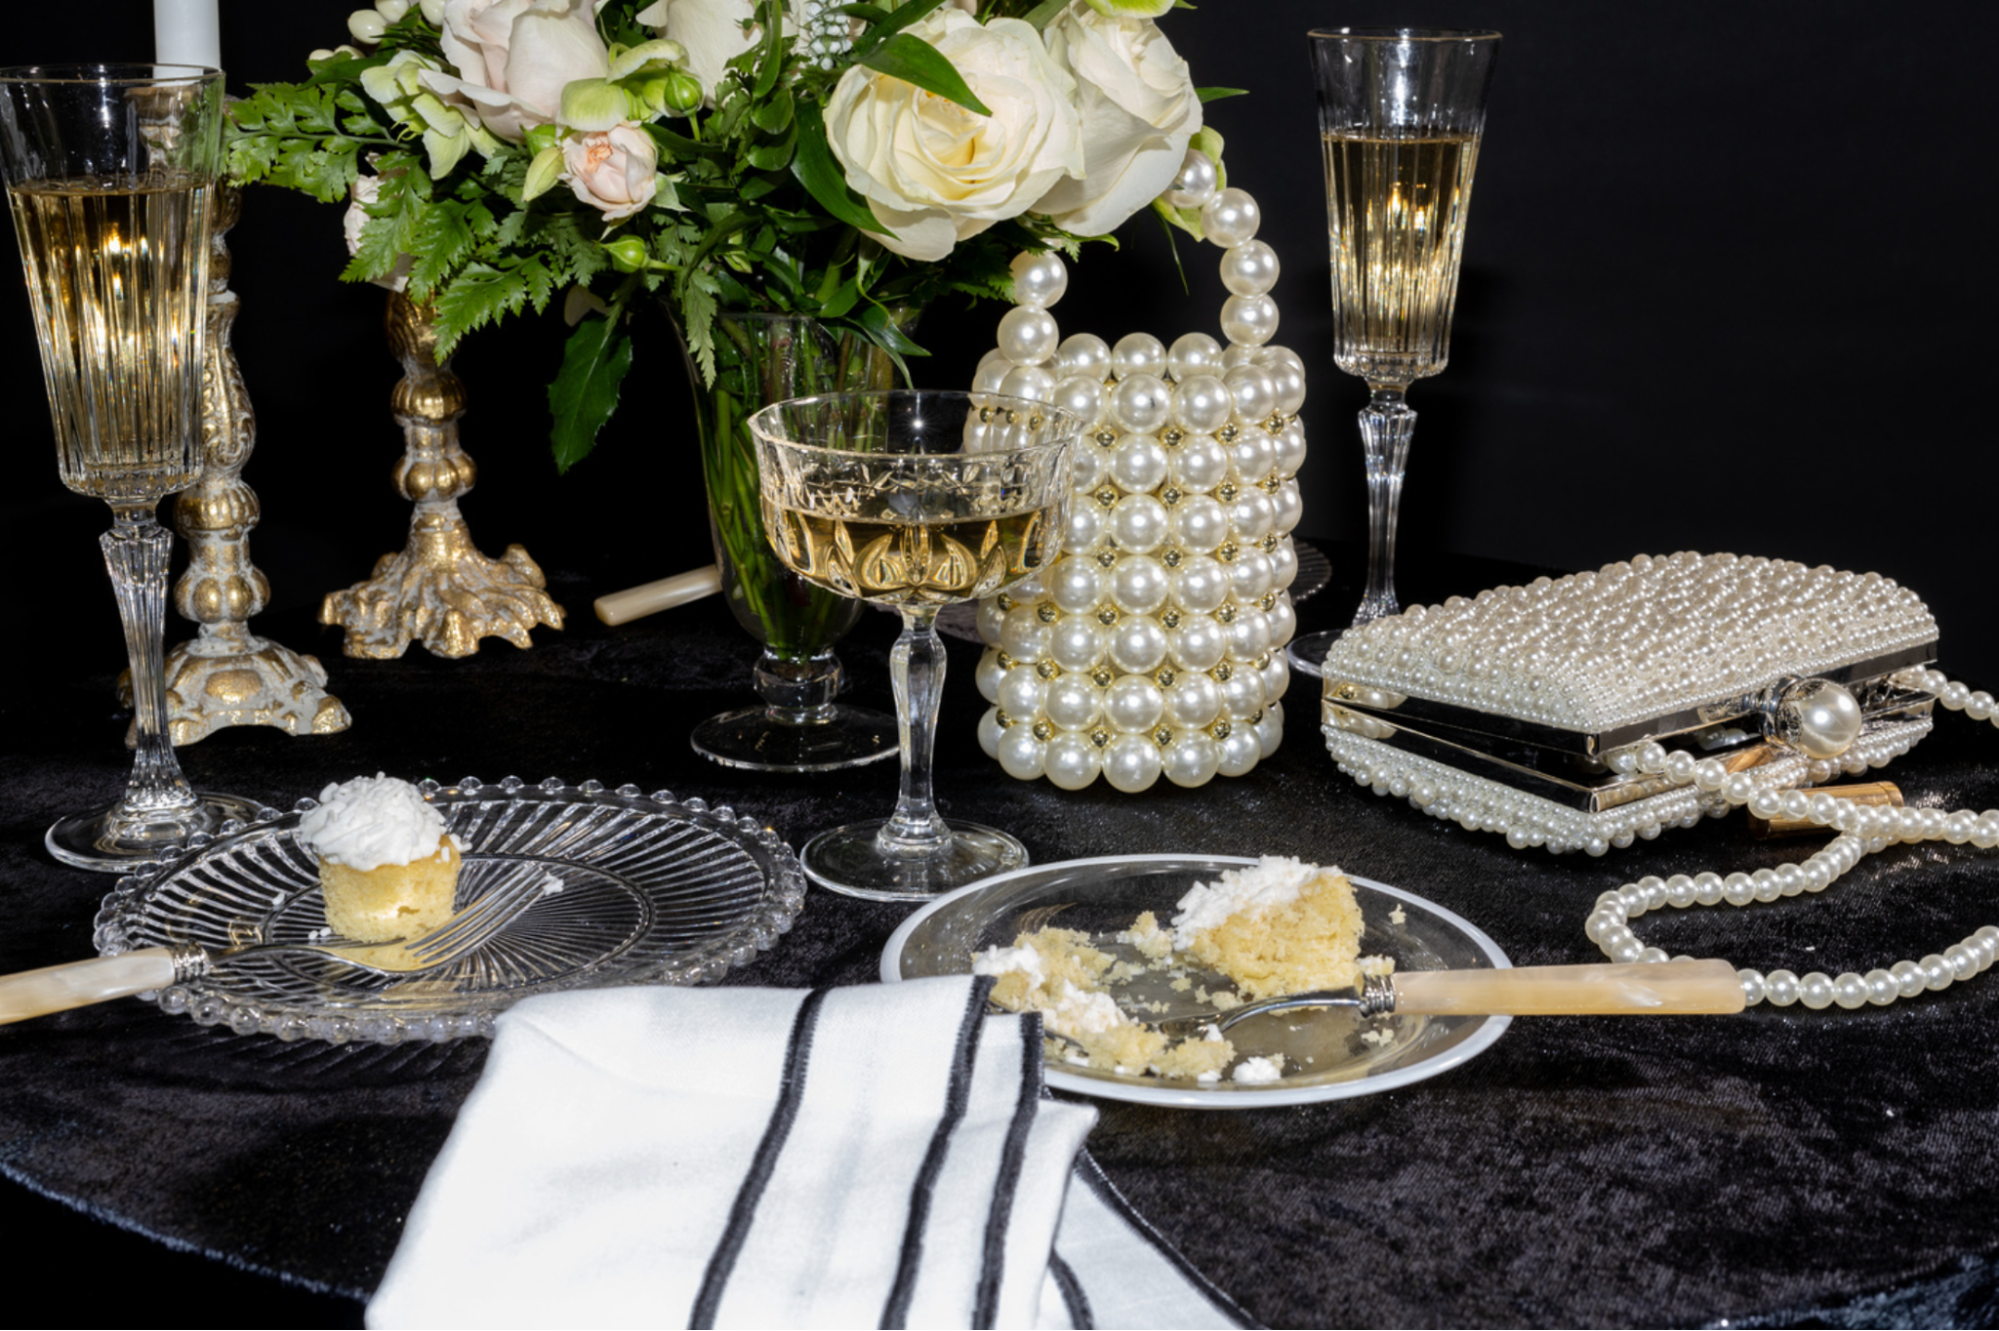 A table setting featuring a partially eaten slice of cake on a plate, cake crumbs, champagne glasses, a floral arrangement, and pearl-studded handbags against a black background.